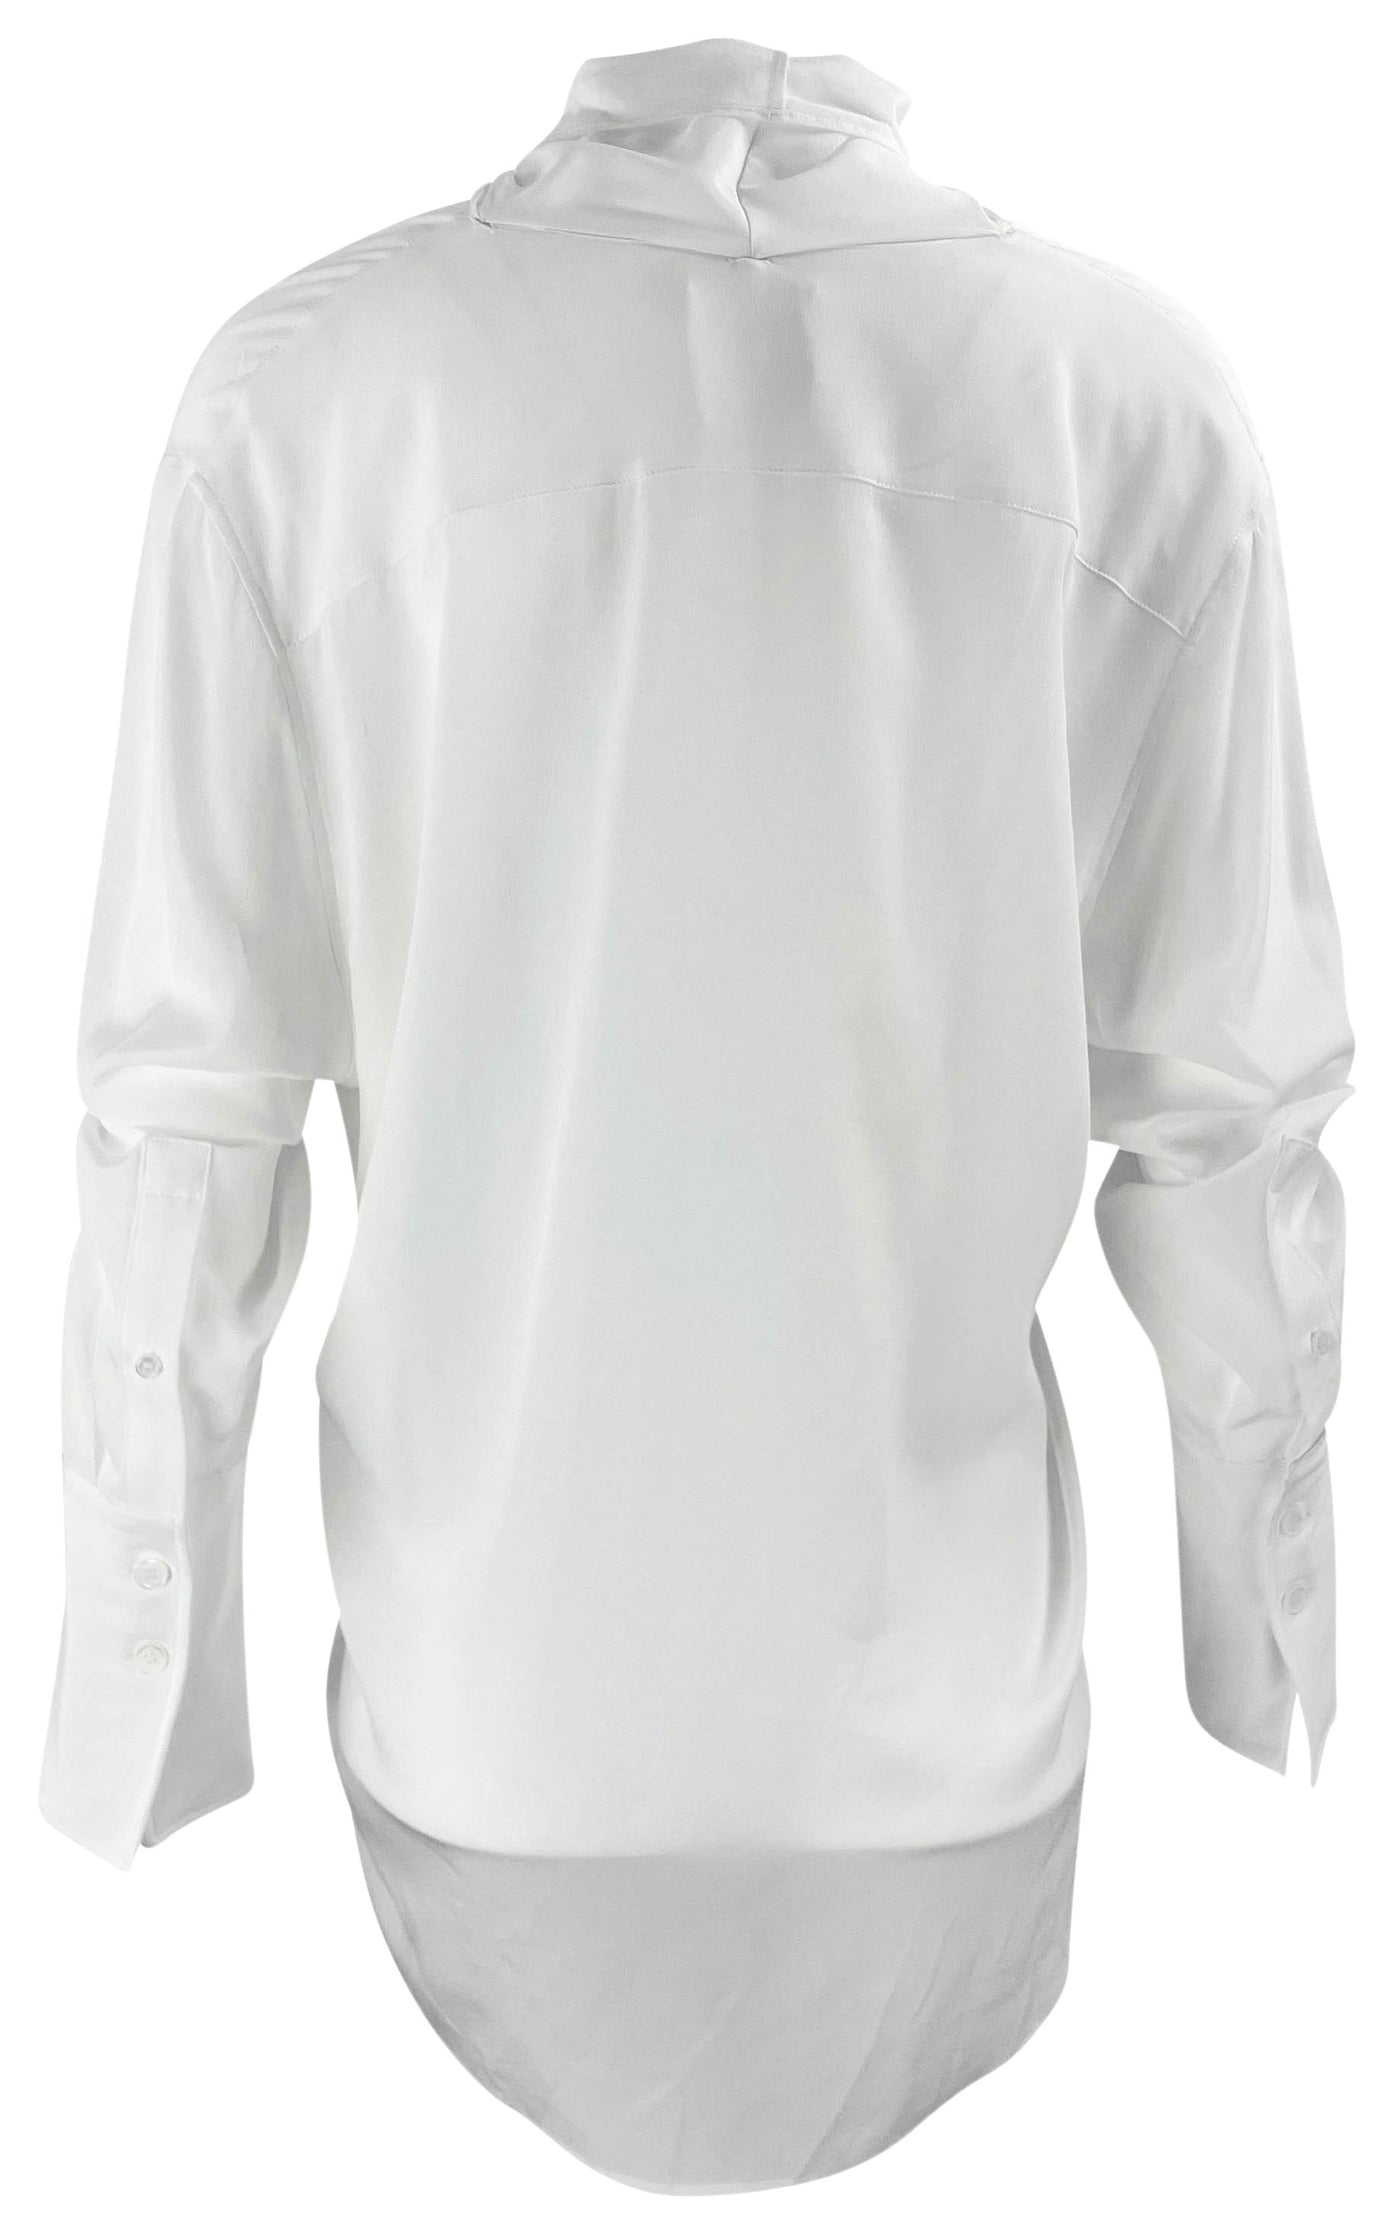 Givenchy Lavaliere Blouse in Off White - Discounts on Givenchy at UAL